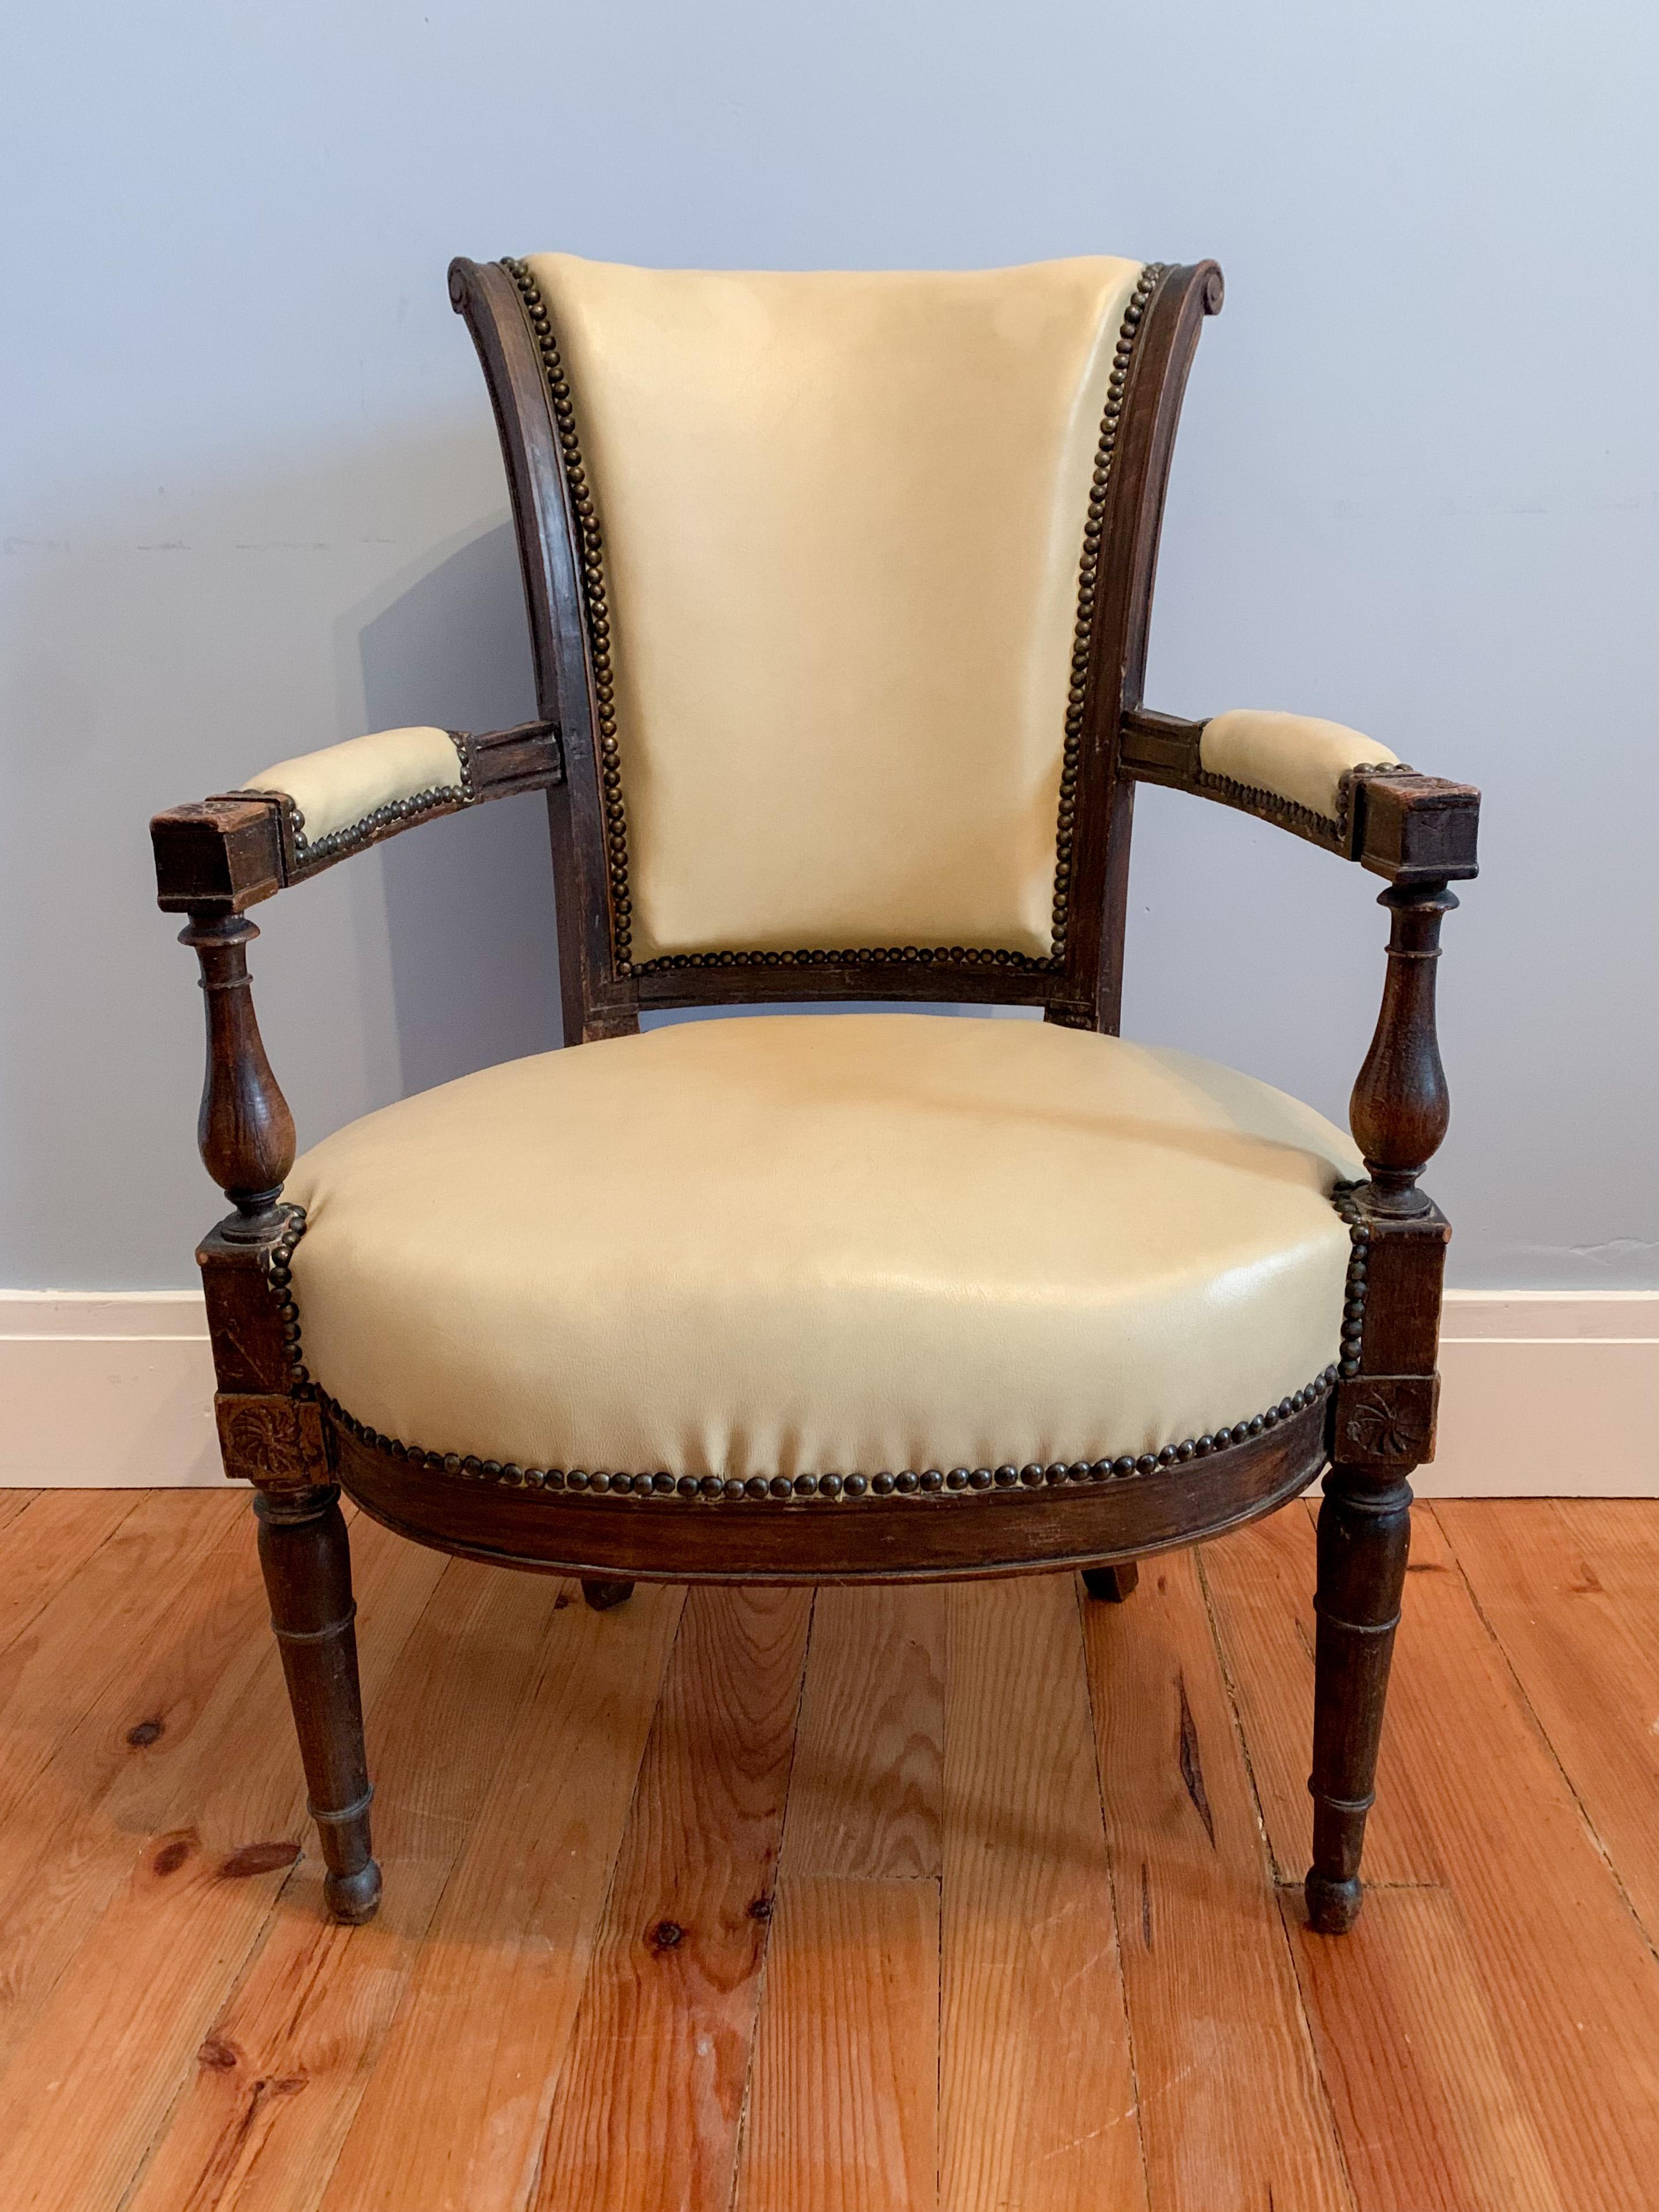 This nice chair of directoire style is characterized by straight and simple forms. The uprights are made of turned wood with floral motifs on the connecting dice (seat and armrests). 

France 19th century.
 